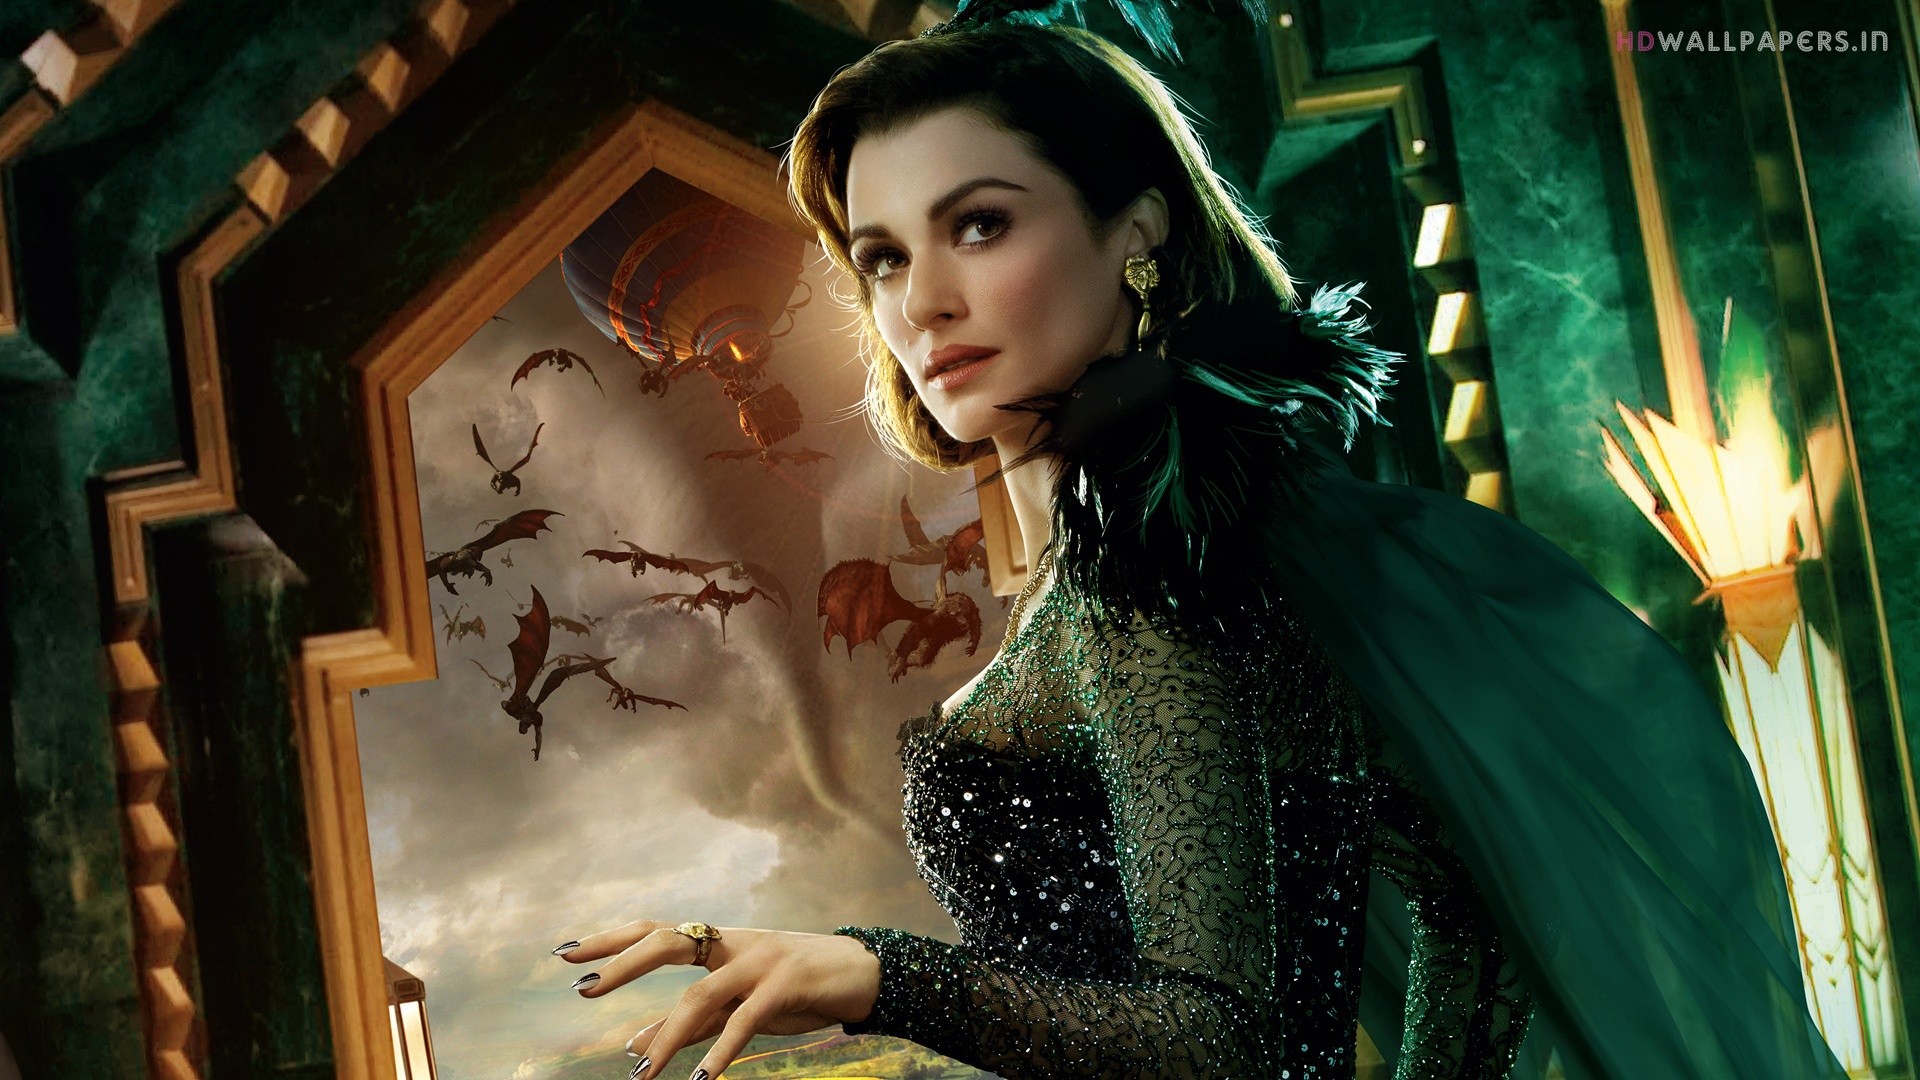 General 1920x1080 Rachel Weisz movies Oz the Great and Powerful women fantasy girl dress rings painted nails